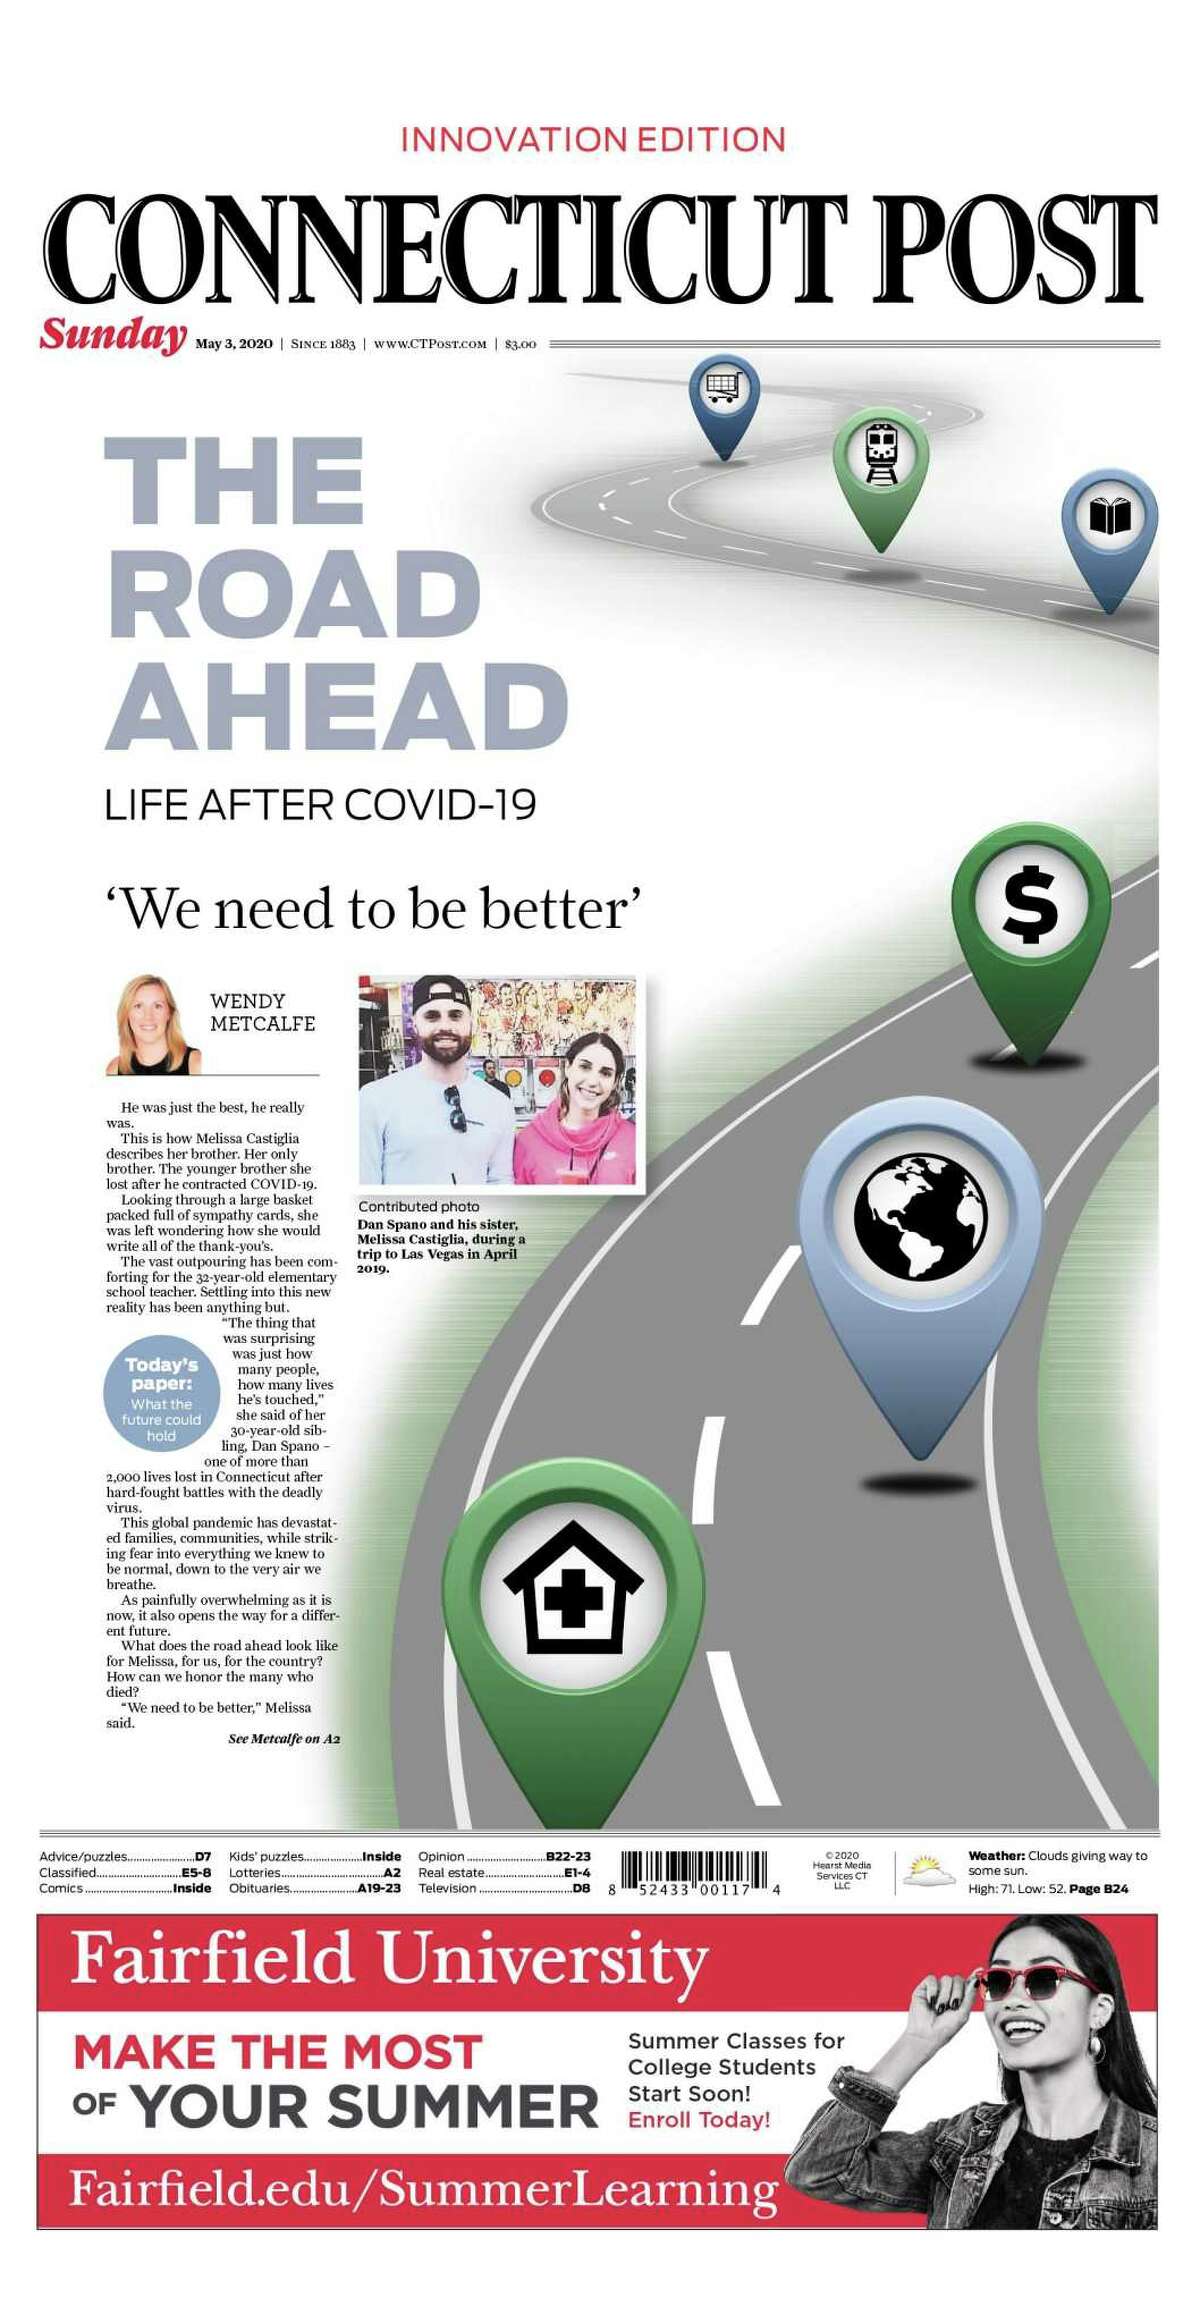 The Road Ahead, a full edition of all of HCMG daily publications that took an in-depth look at what Connecticut residents might face next in the pandemic, was awarded first place in a new COVID series category.